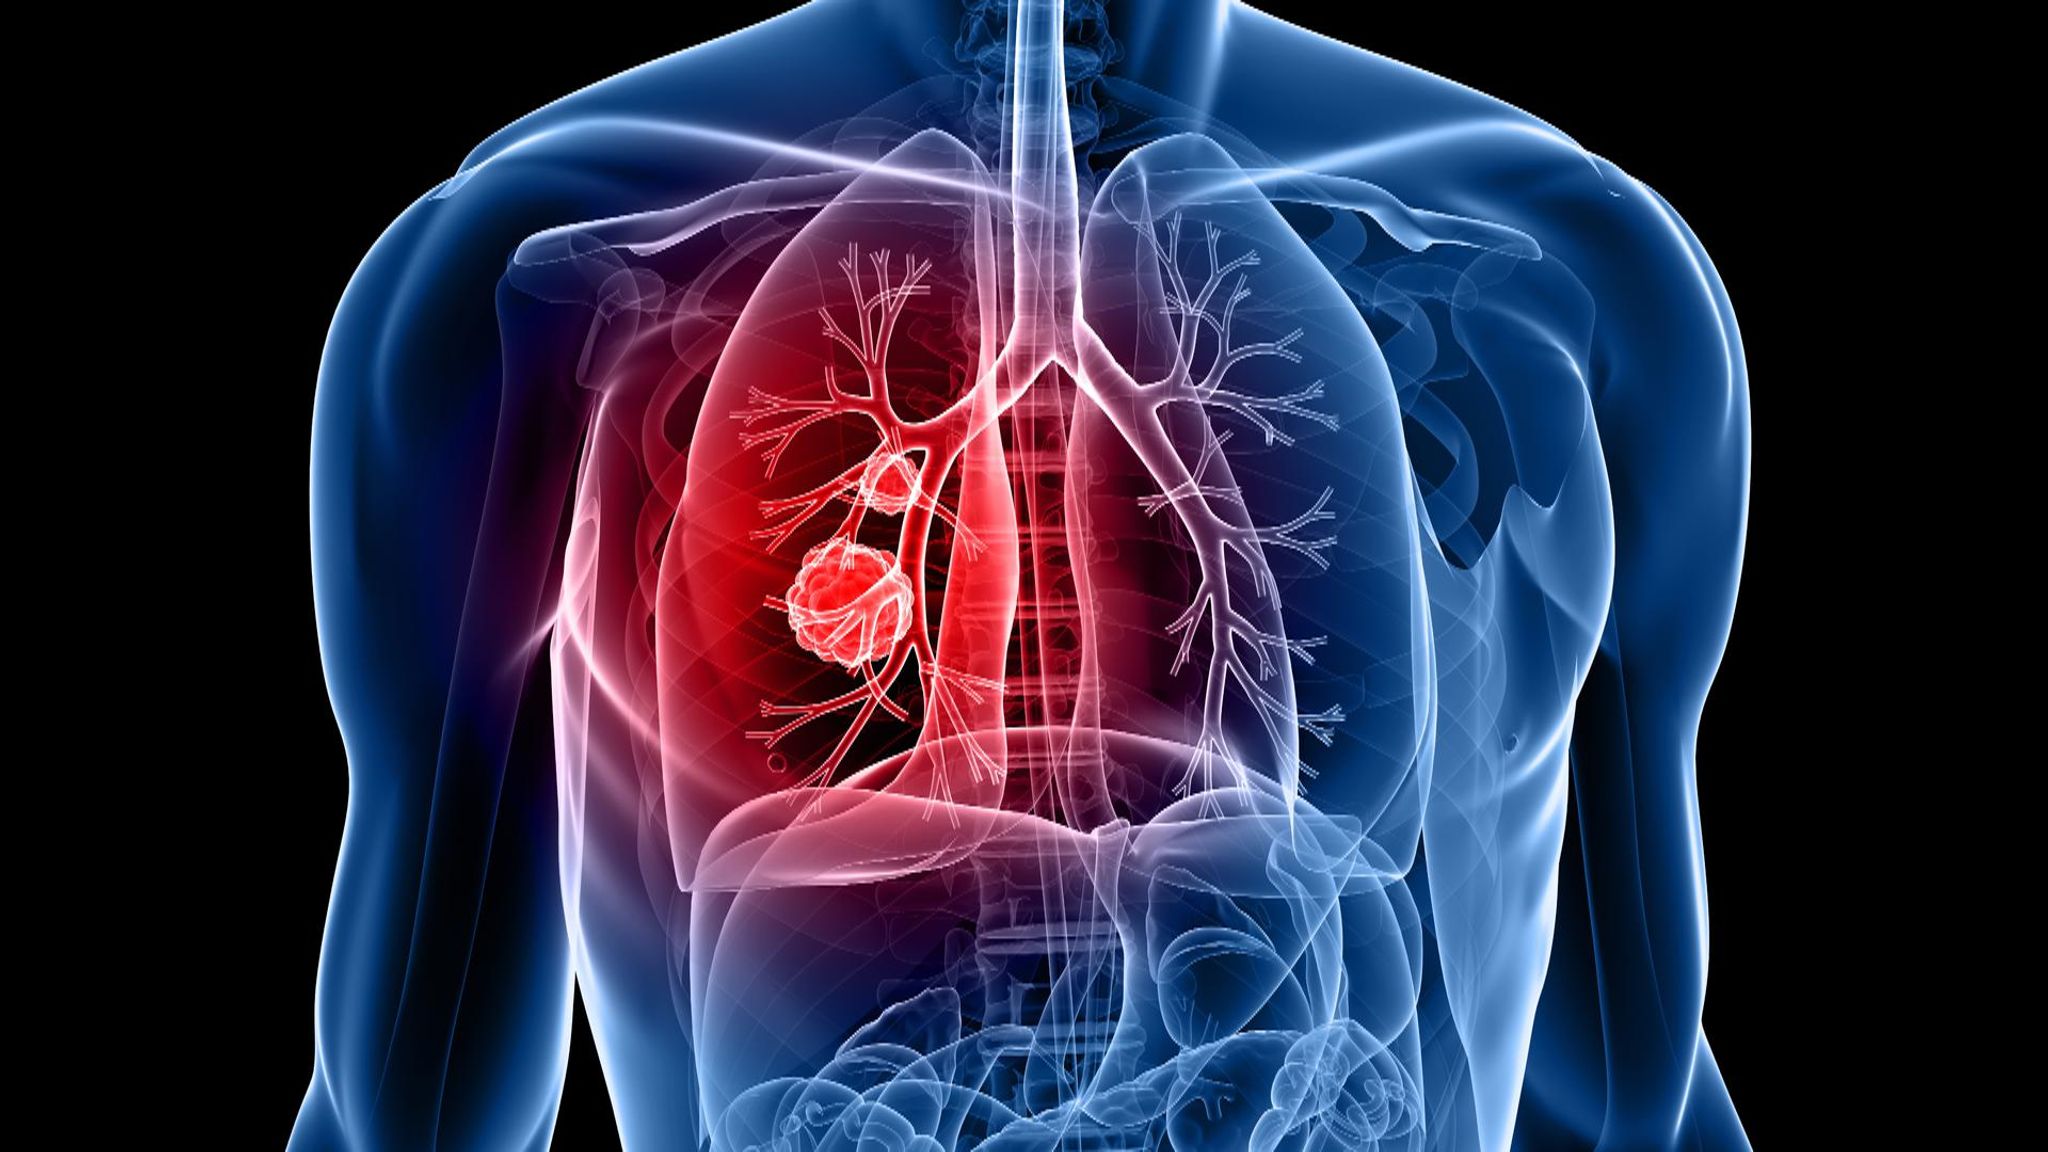 NON-SMOKING RELATED RISK FACTORS FOR LUNG CANCER